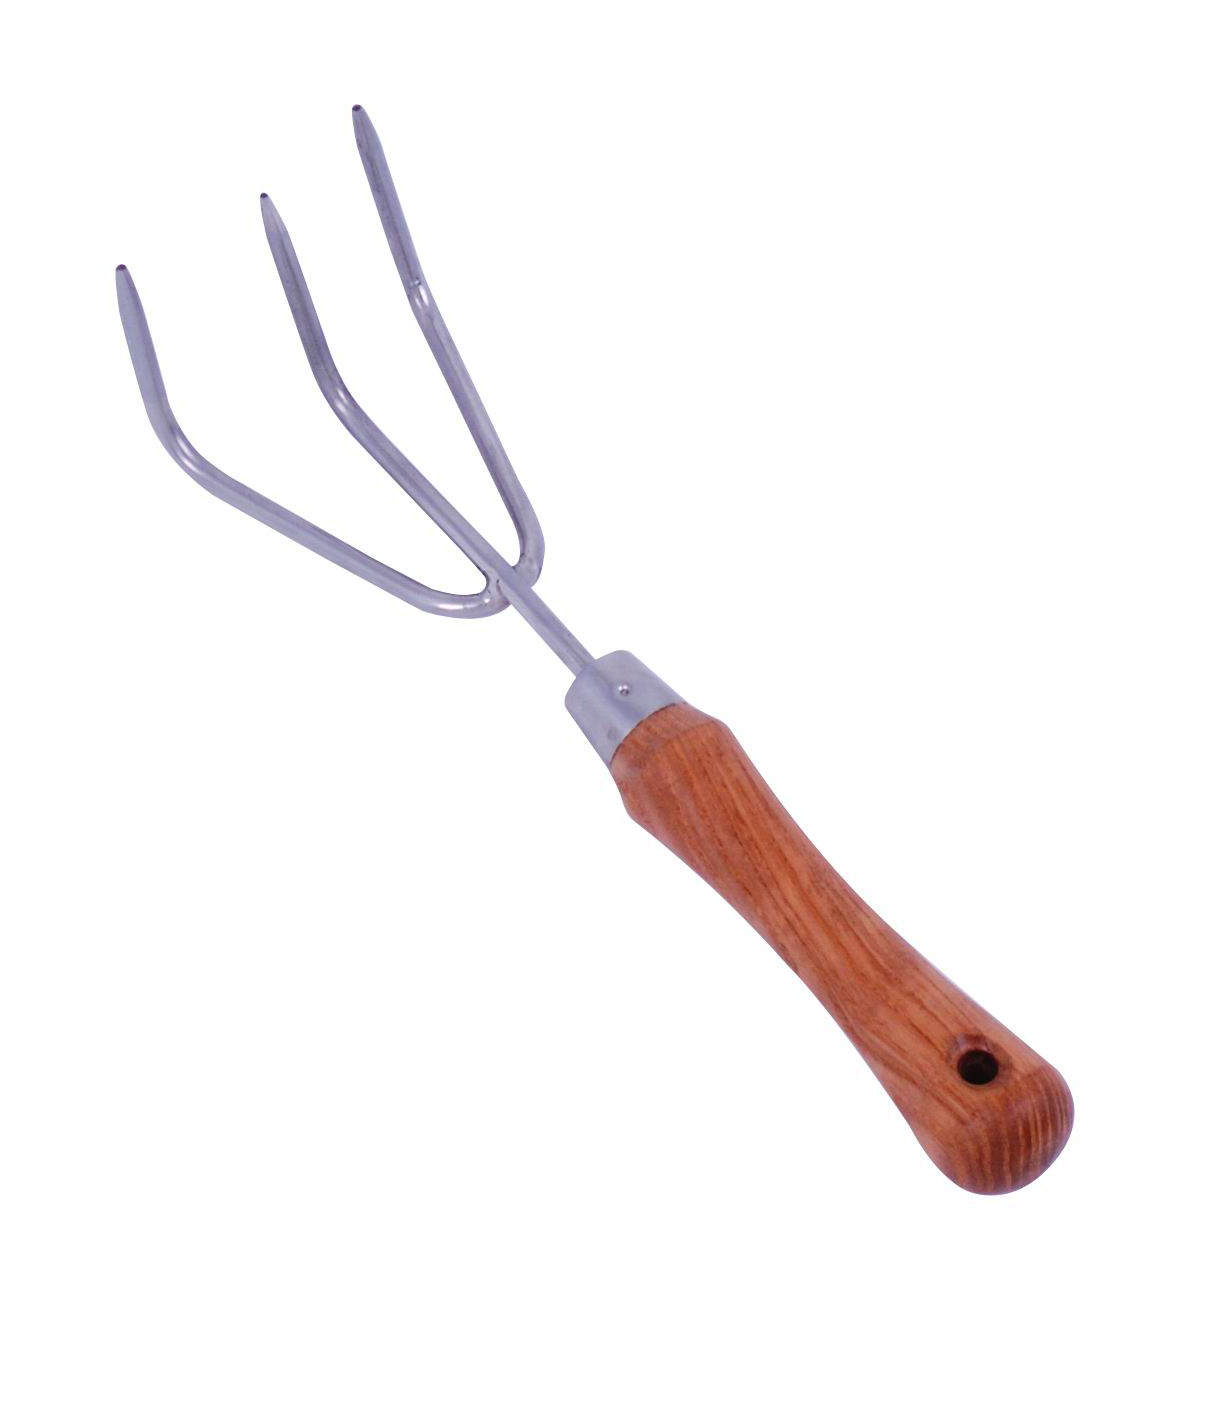  Stainless Steel Cultivator with Ash Wood Handle ( Stainless Steel Cultivator with Ash Wood Handle)